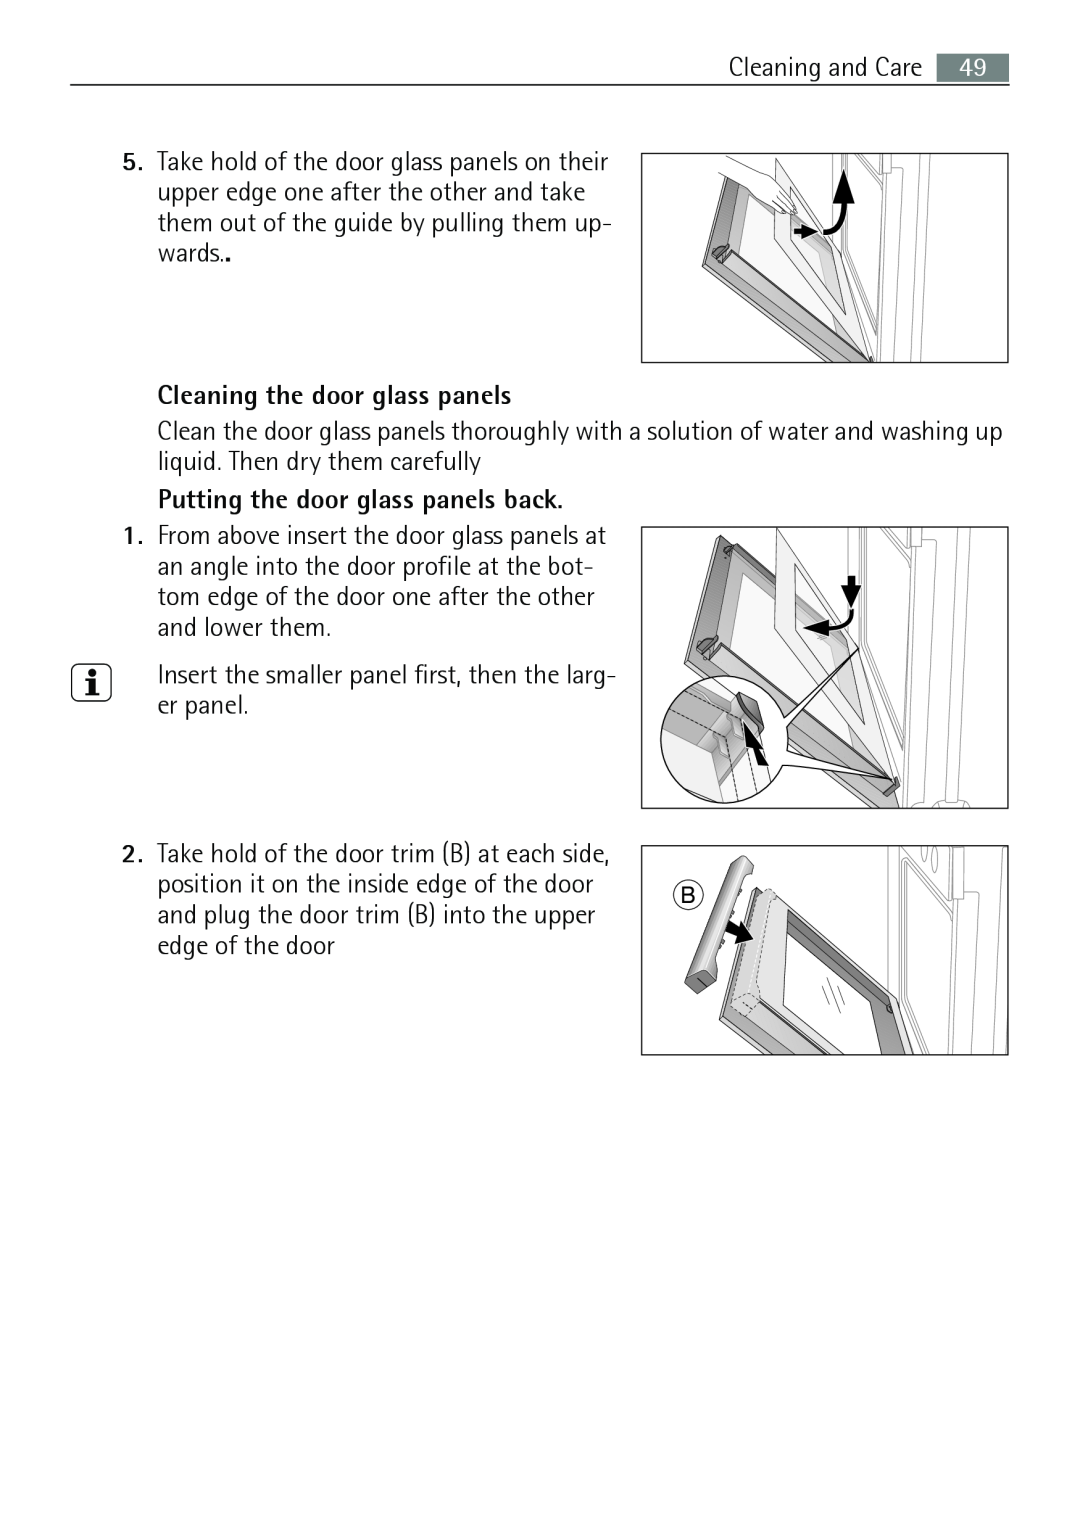 Electrolux E43012-5 user manual Cleaning the door glass panels, Putting the door glass panels back 